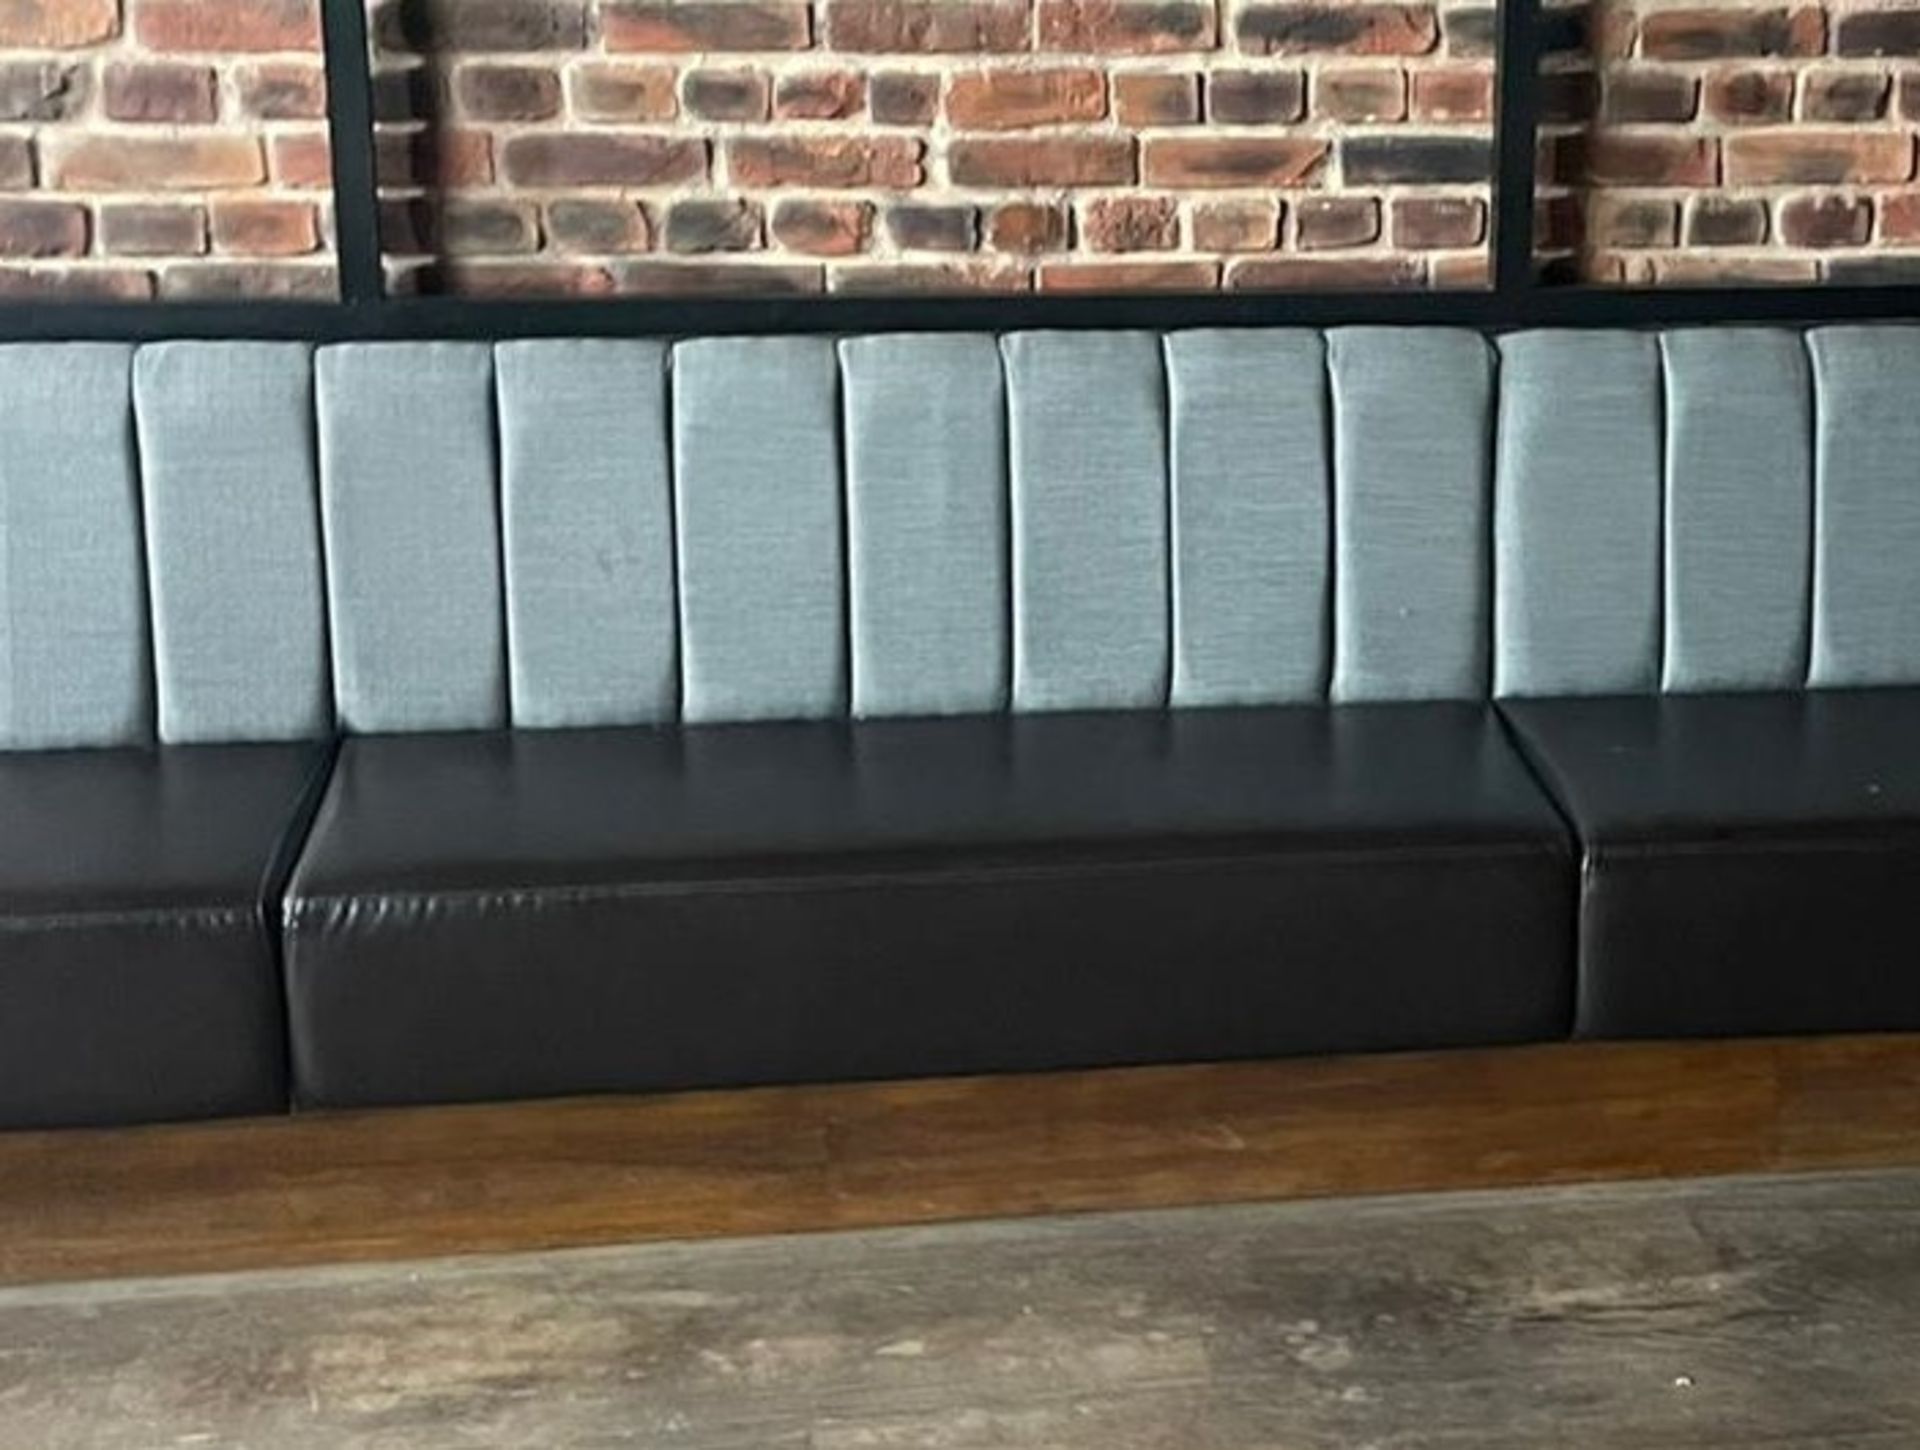 1 x Long Seating Bench With Brown Leather Seats and Grey Backrests - Comes in Four Sections For Easy